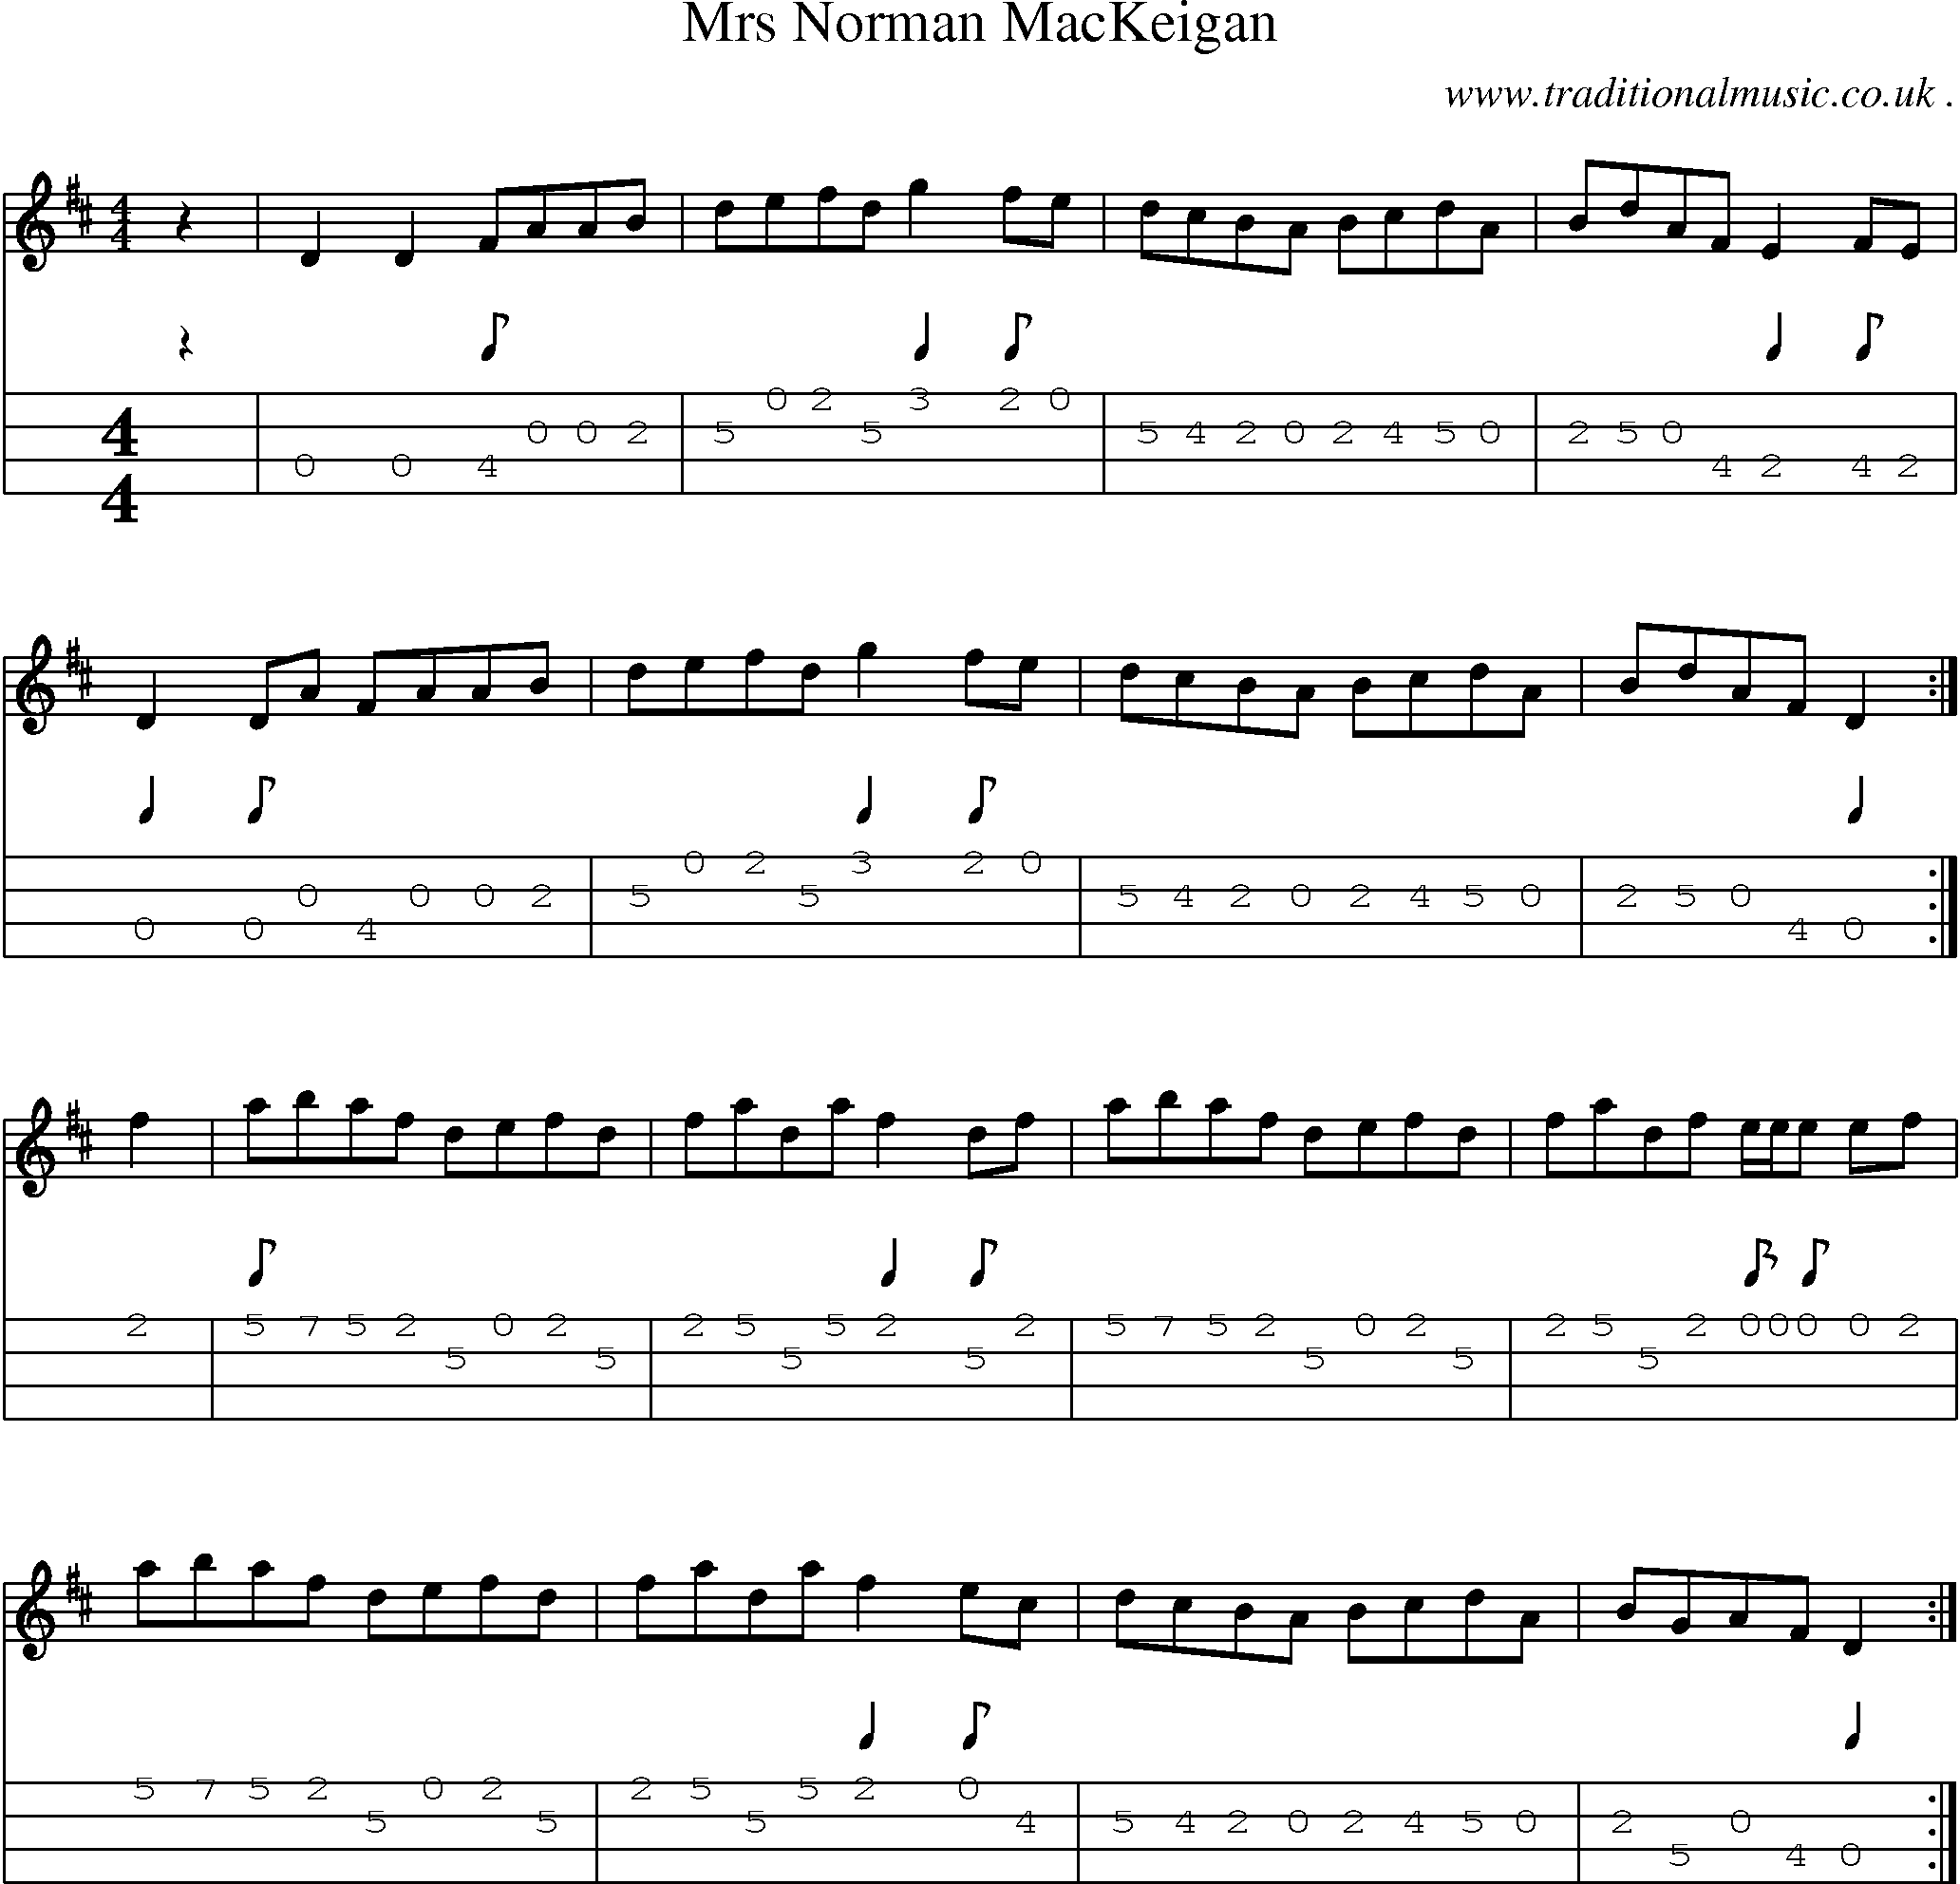 Sheet-music  score, Chords and Mandolin Tabs for Mrs Norman Mackeigan